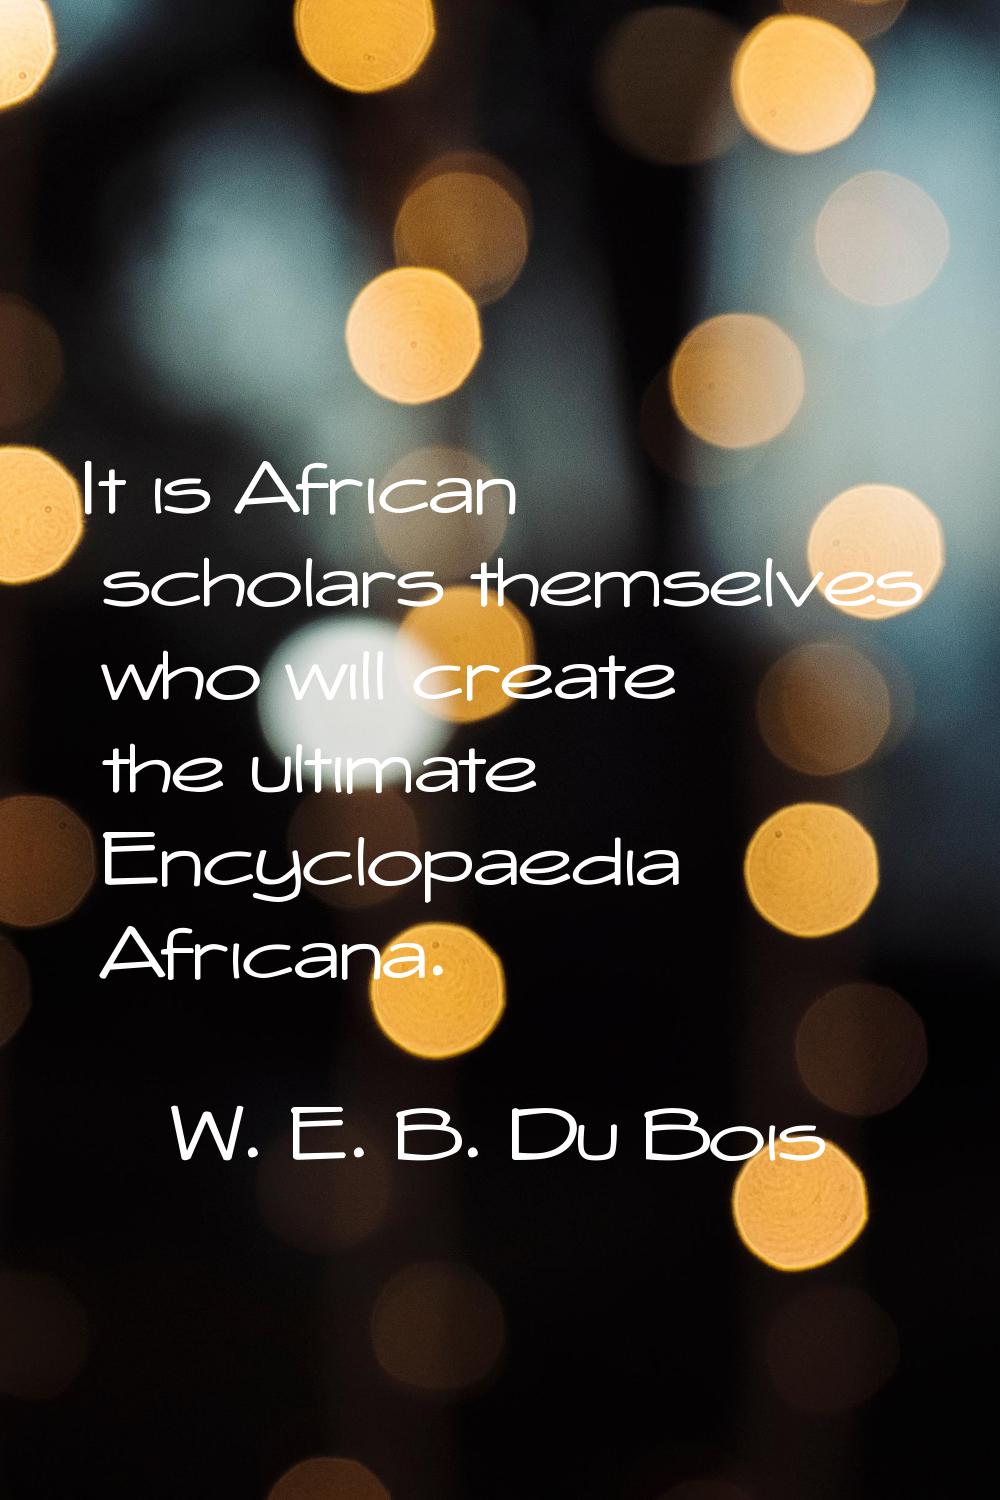 It is African scholars themselves who will create the ultimate Encyclopaedia Africana.